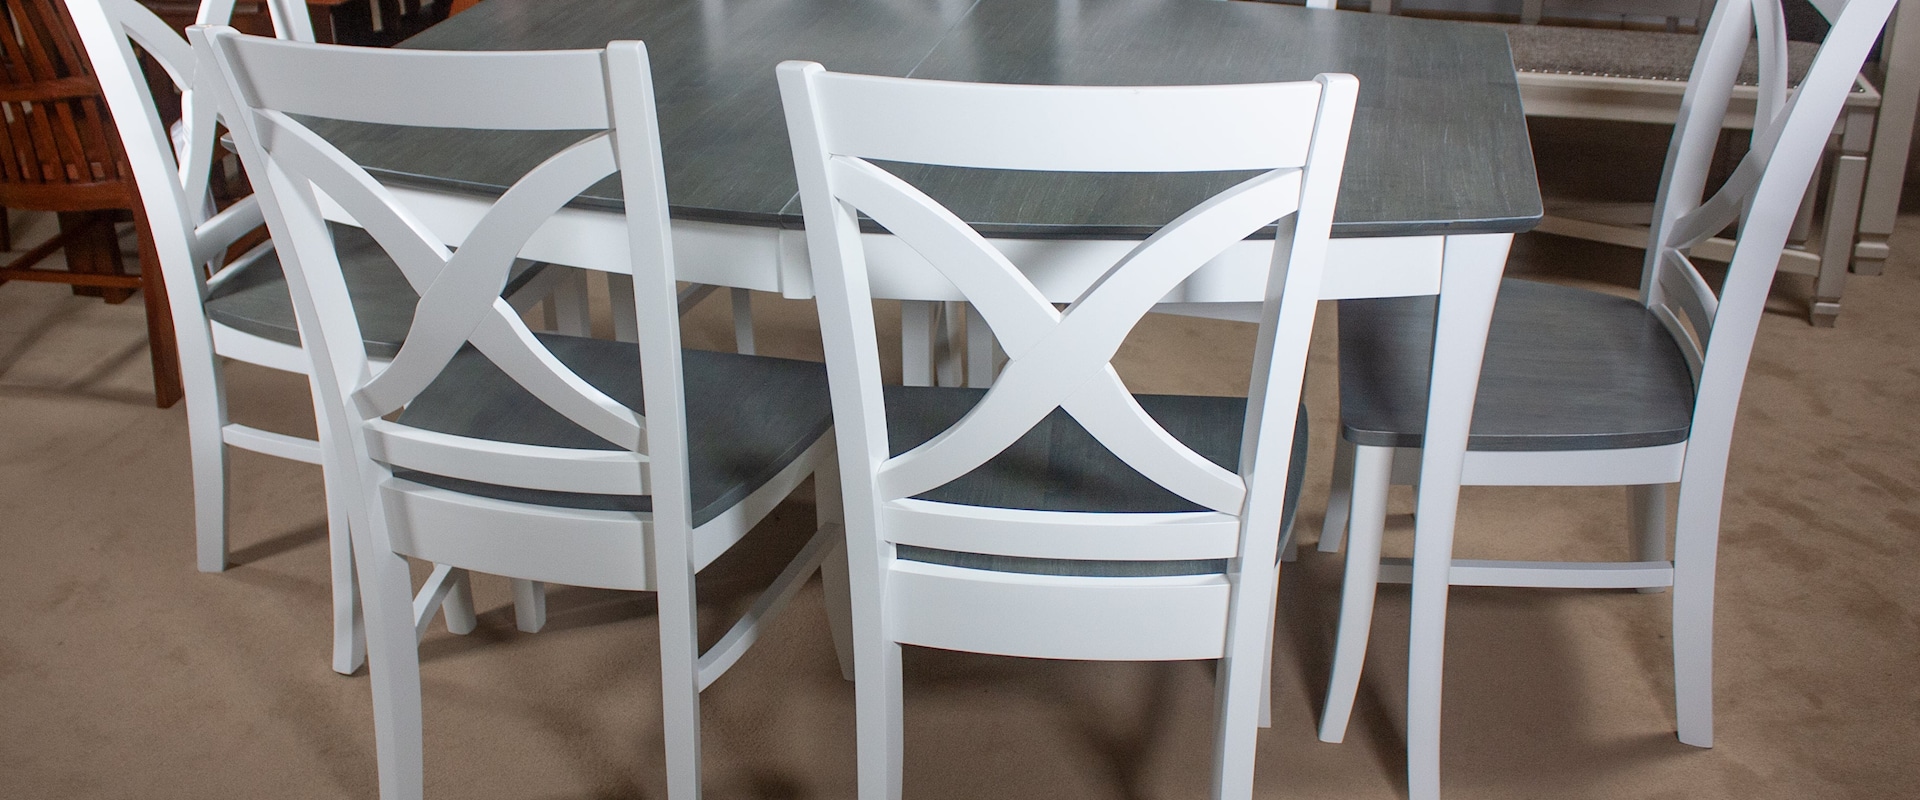 Solerno Butterfly Extension Table with 6 Solerno Side Chairs in Two-Tone Heather Gray/White Finish